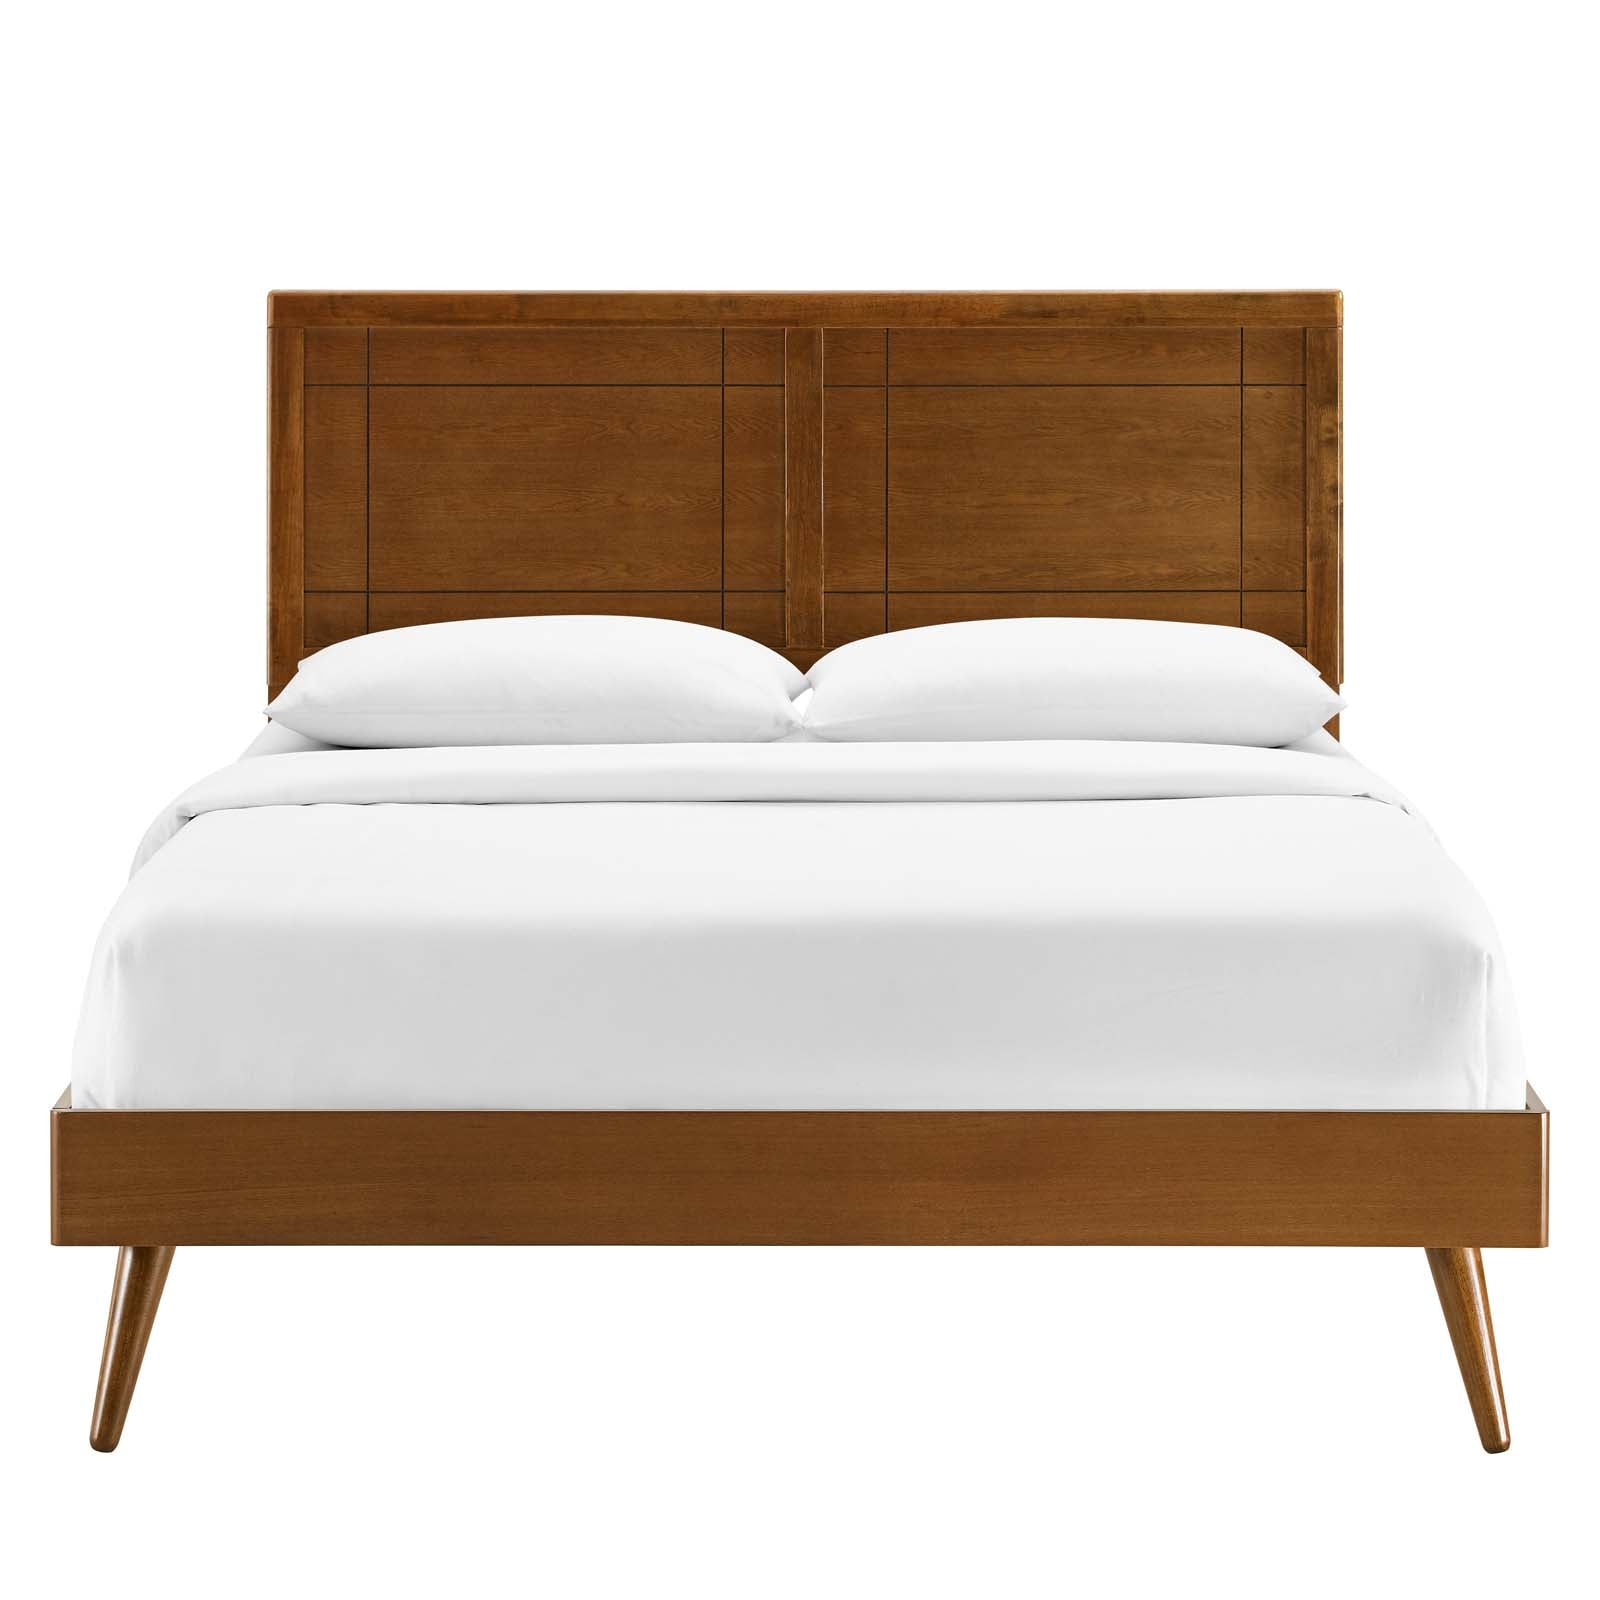 Modway Beds - Marlee Queen Wood Platform Bed With Splayed Legs Walnut